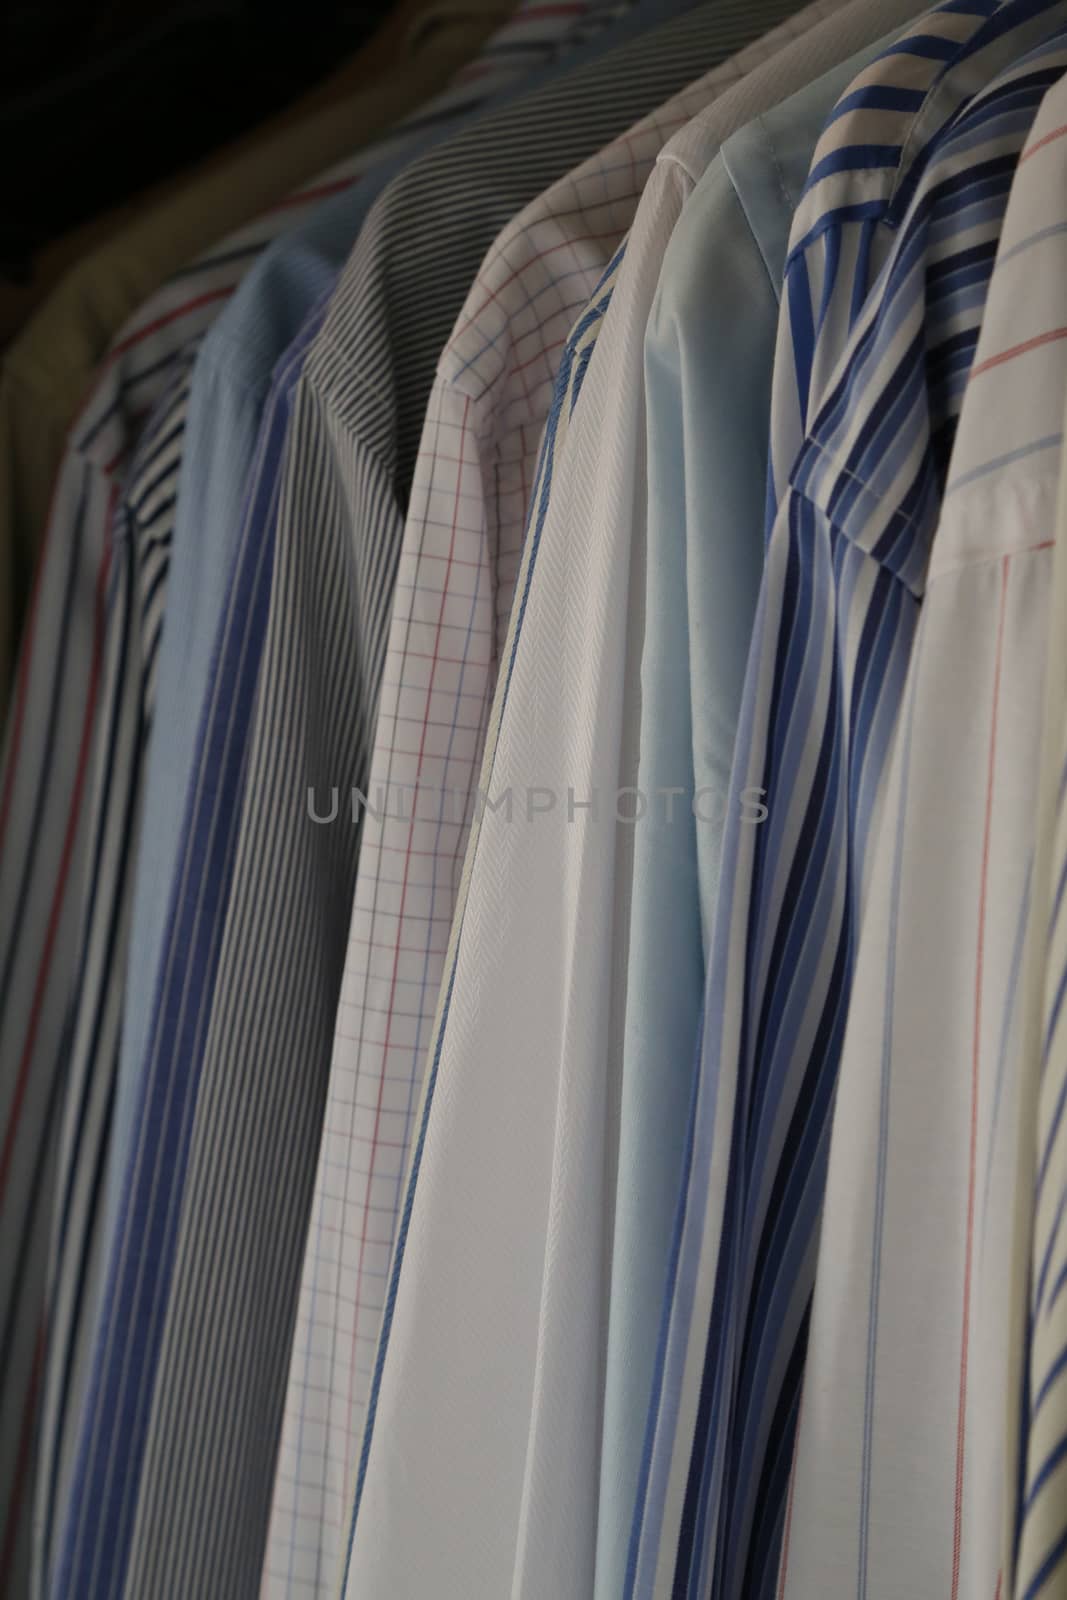 row ofbusiness man's hanging shirts of different colors